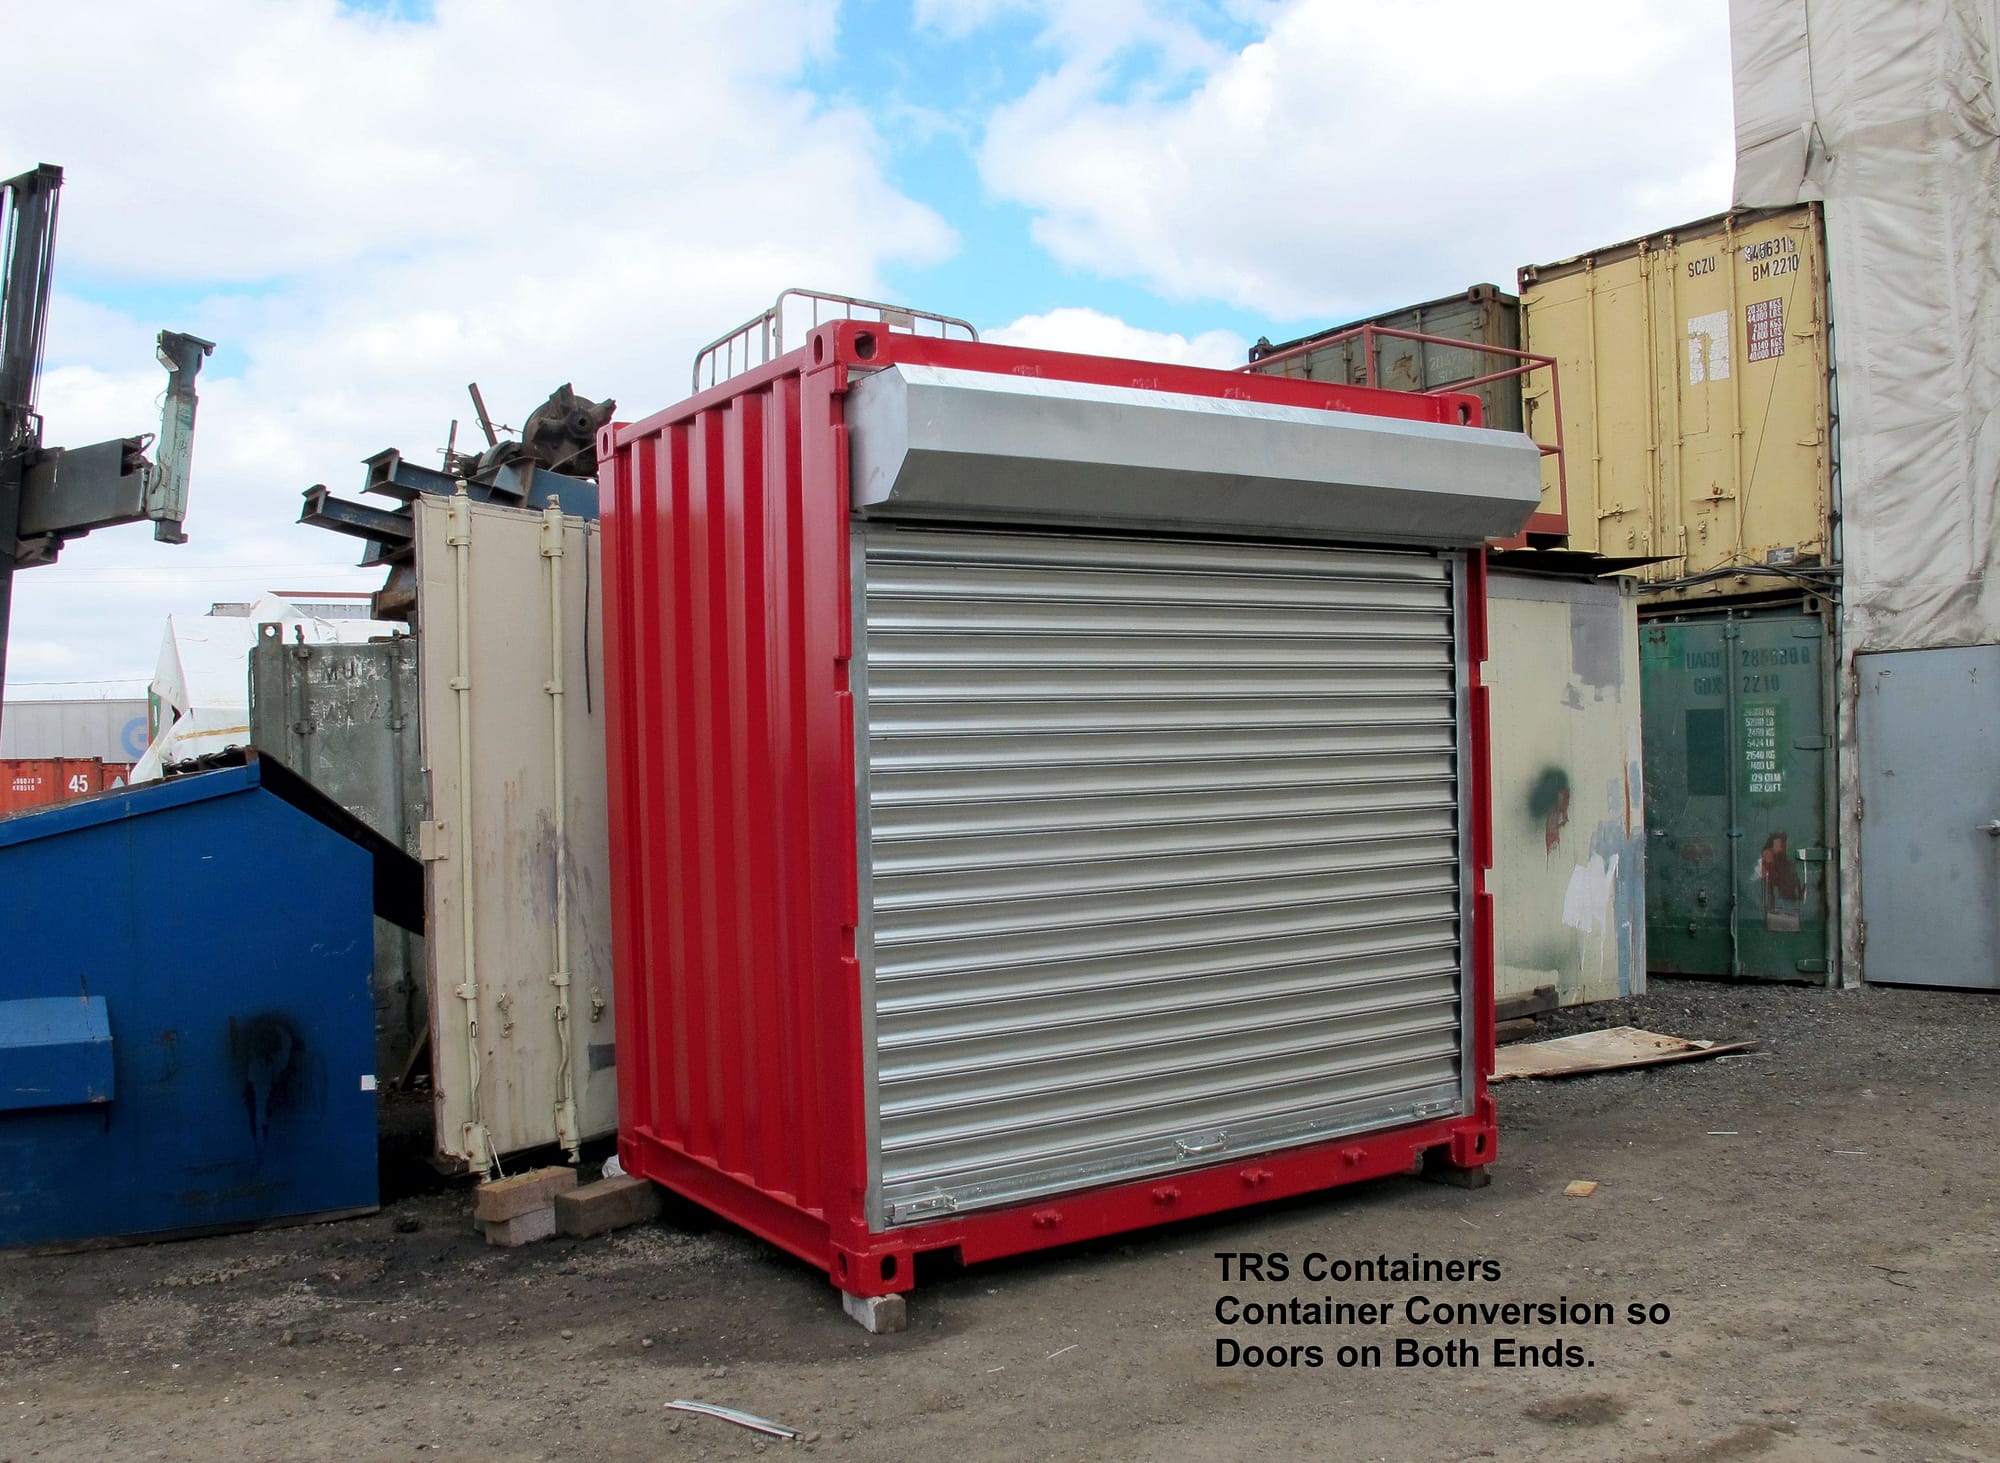 TRS Containesr offers new double doors and used fabricated containers with doors on both ends